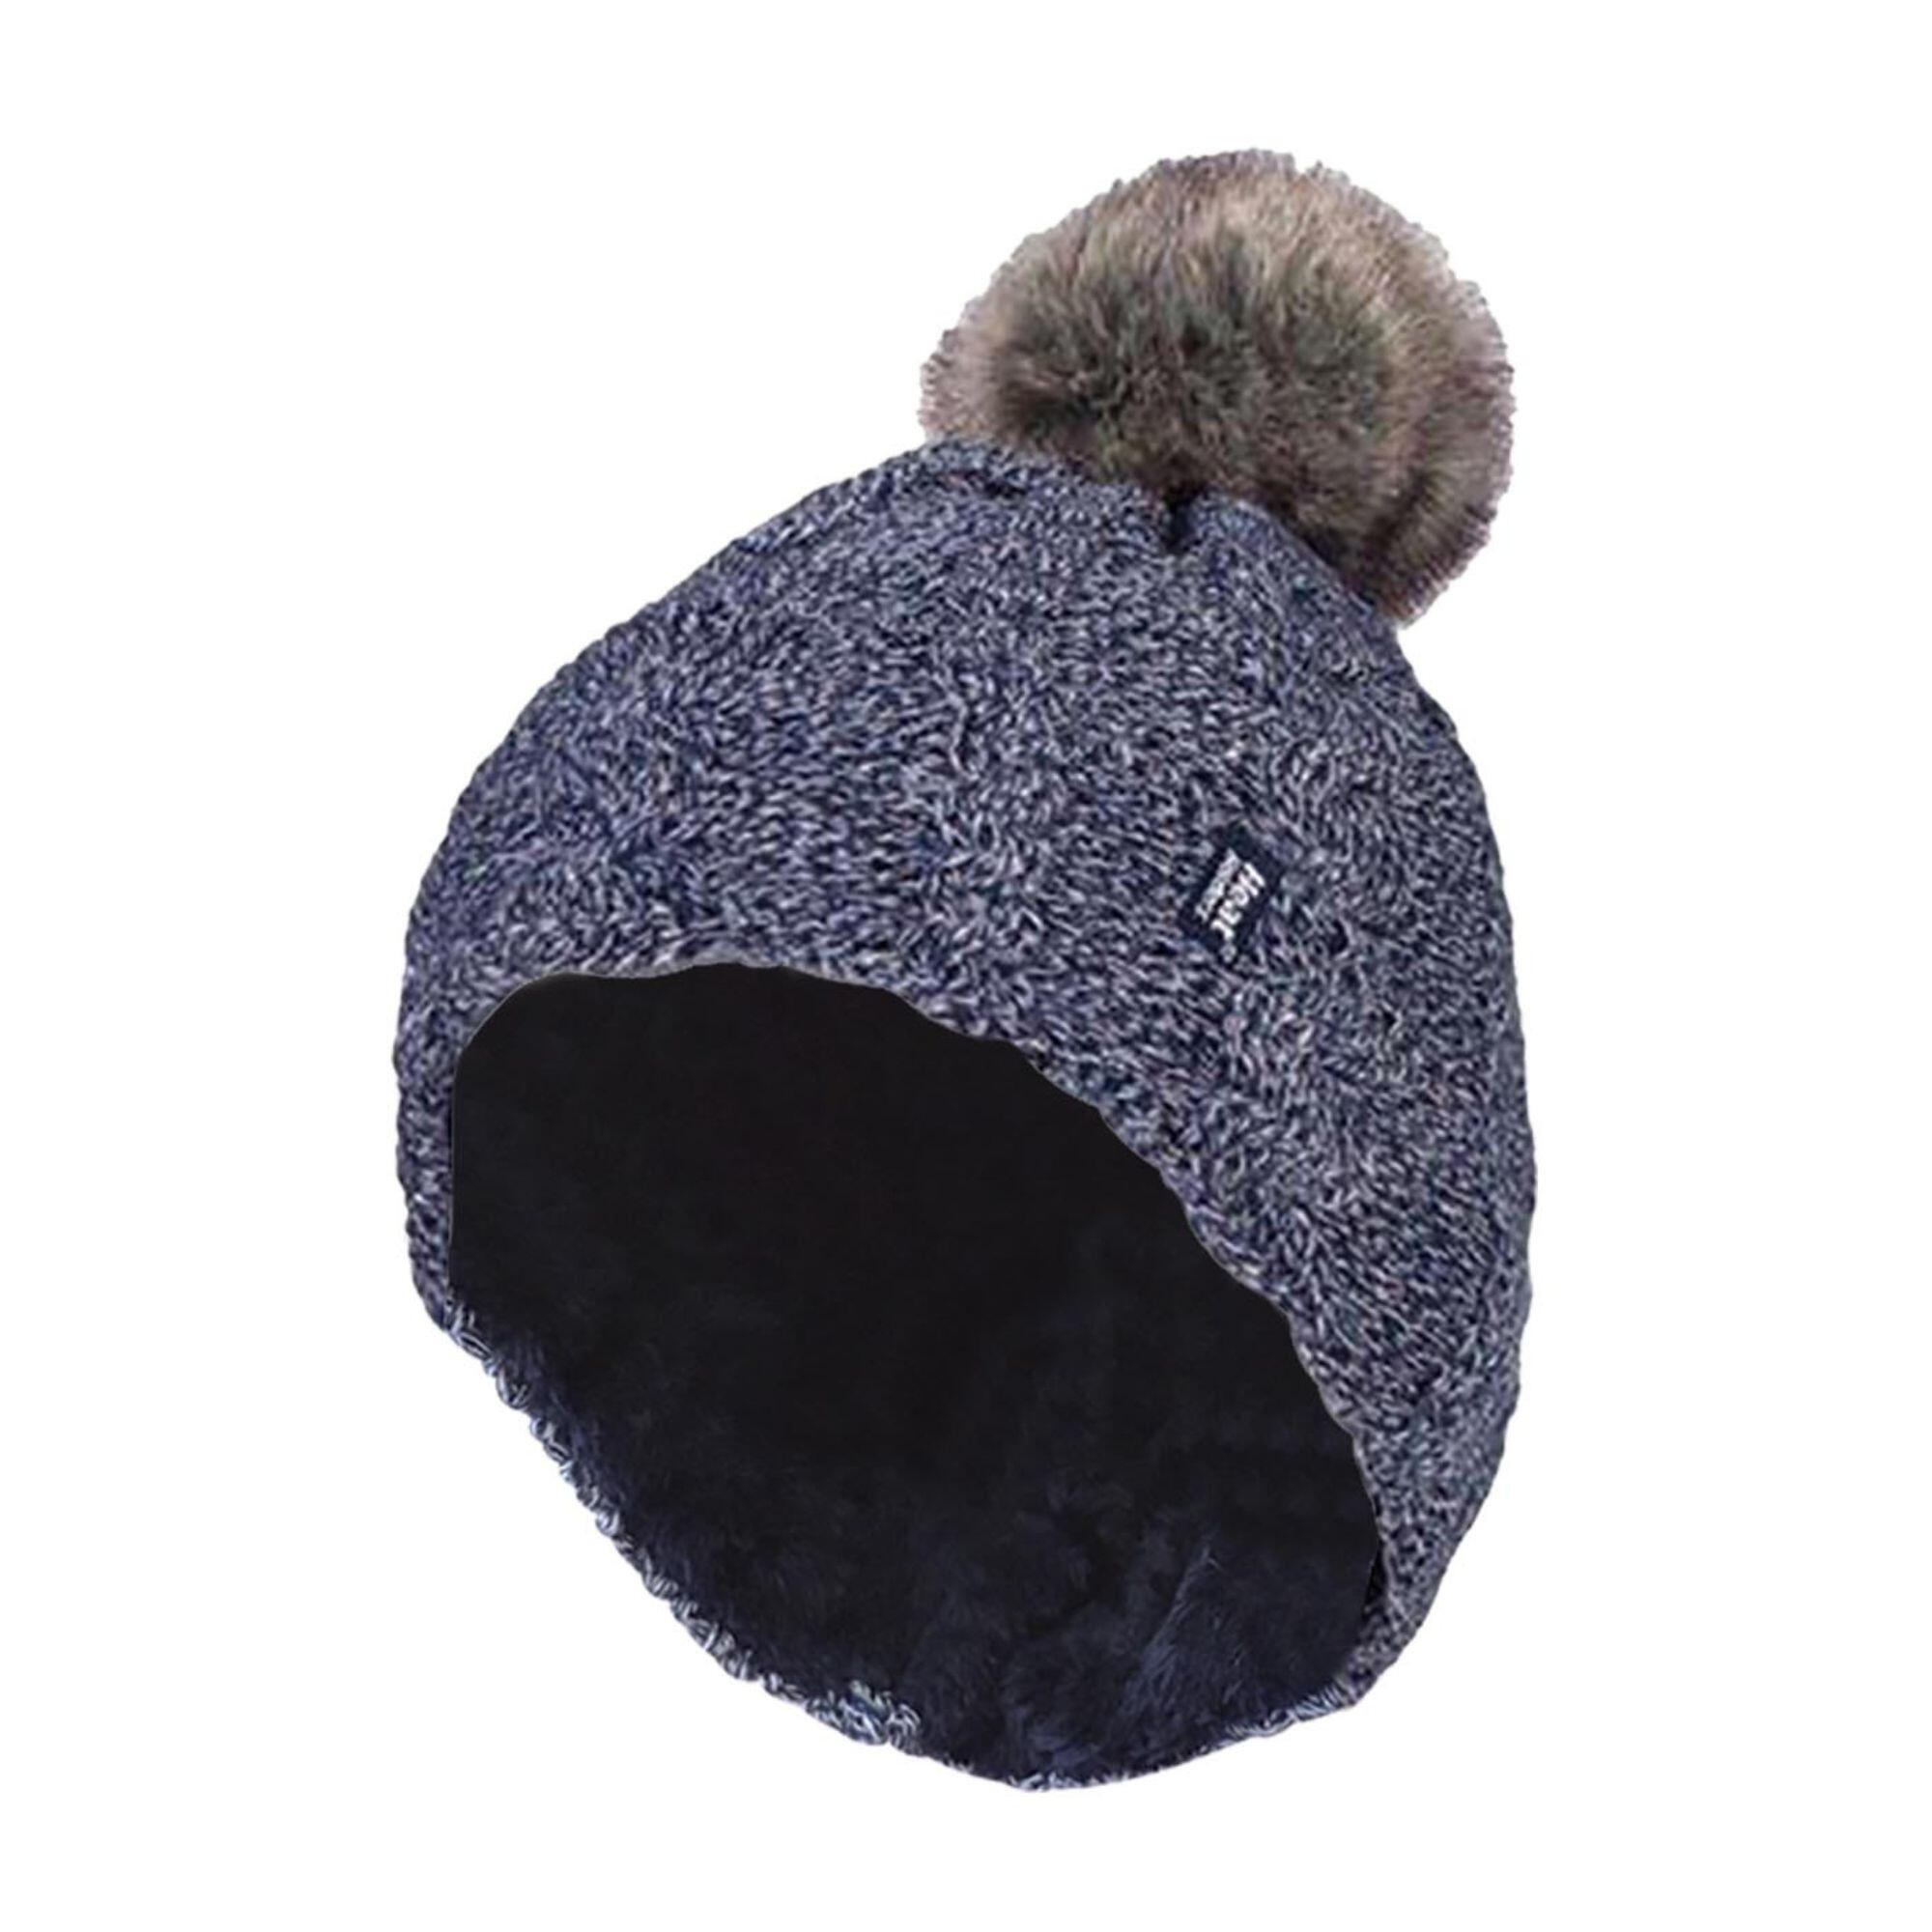 Ladies Knit Fleece Lined Thermal Bobble Hat with Pom Pom 1/4